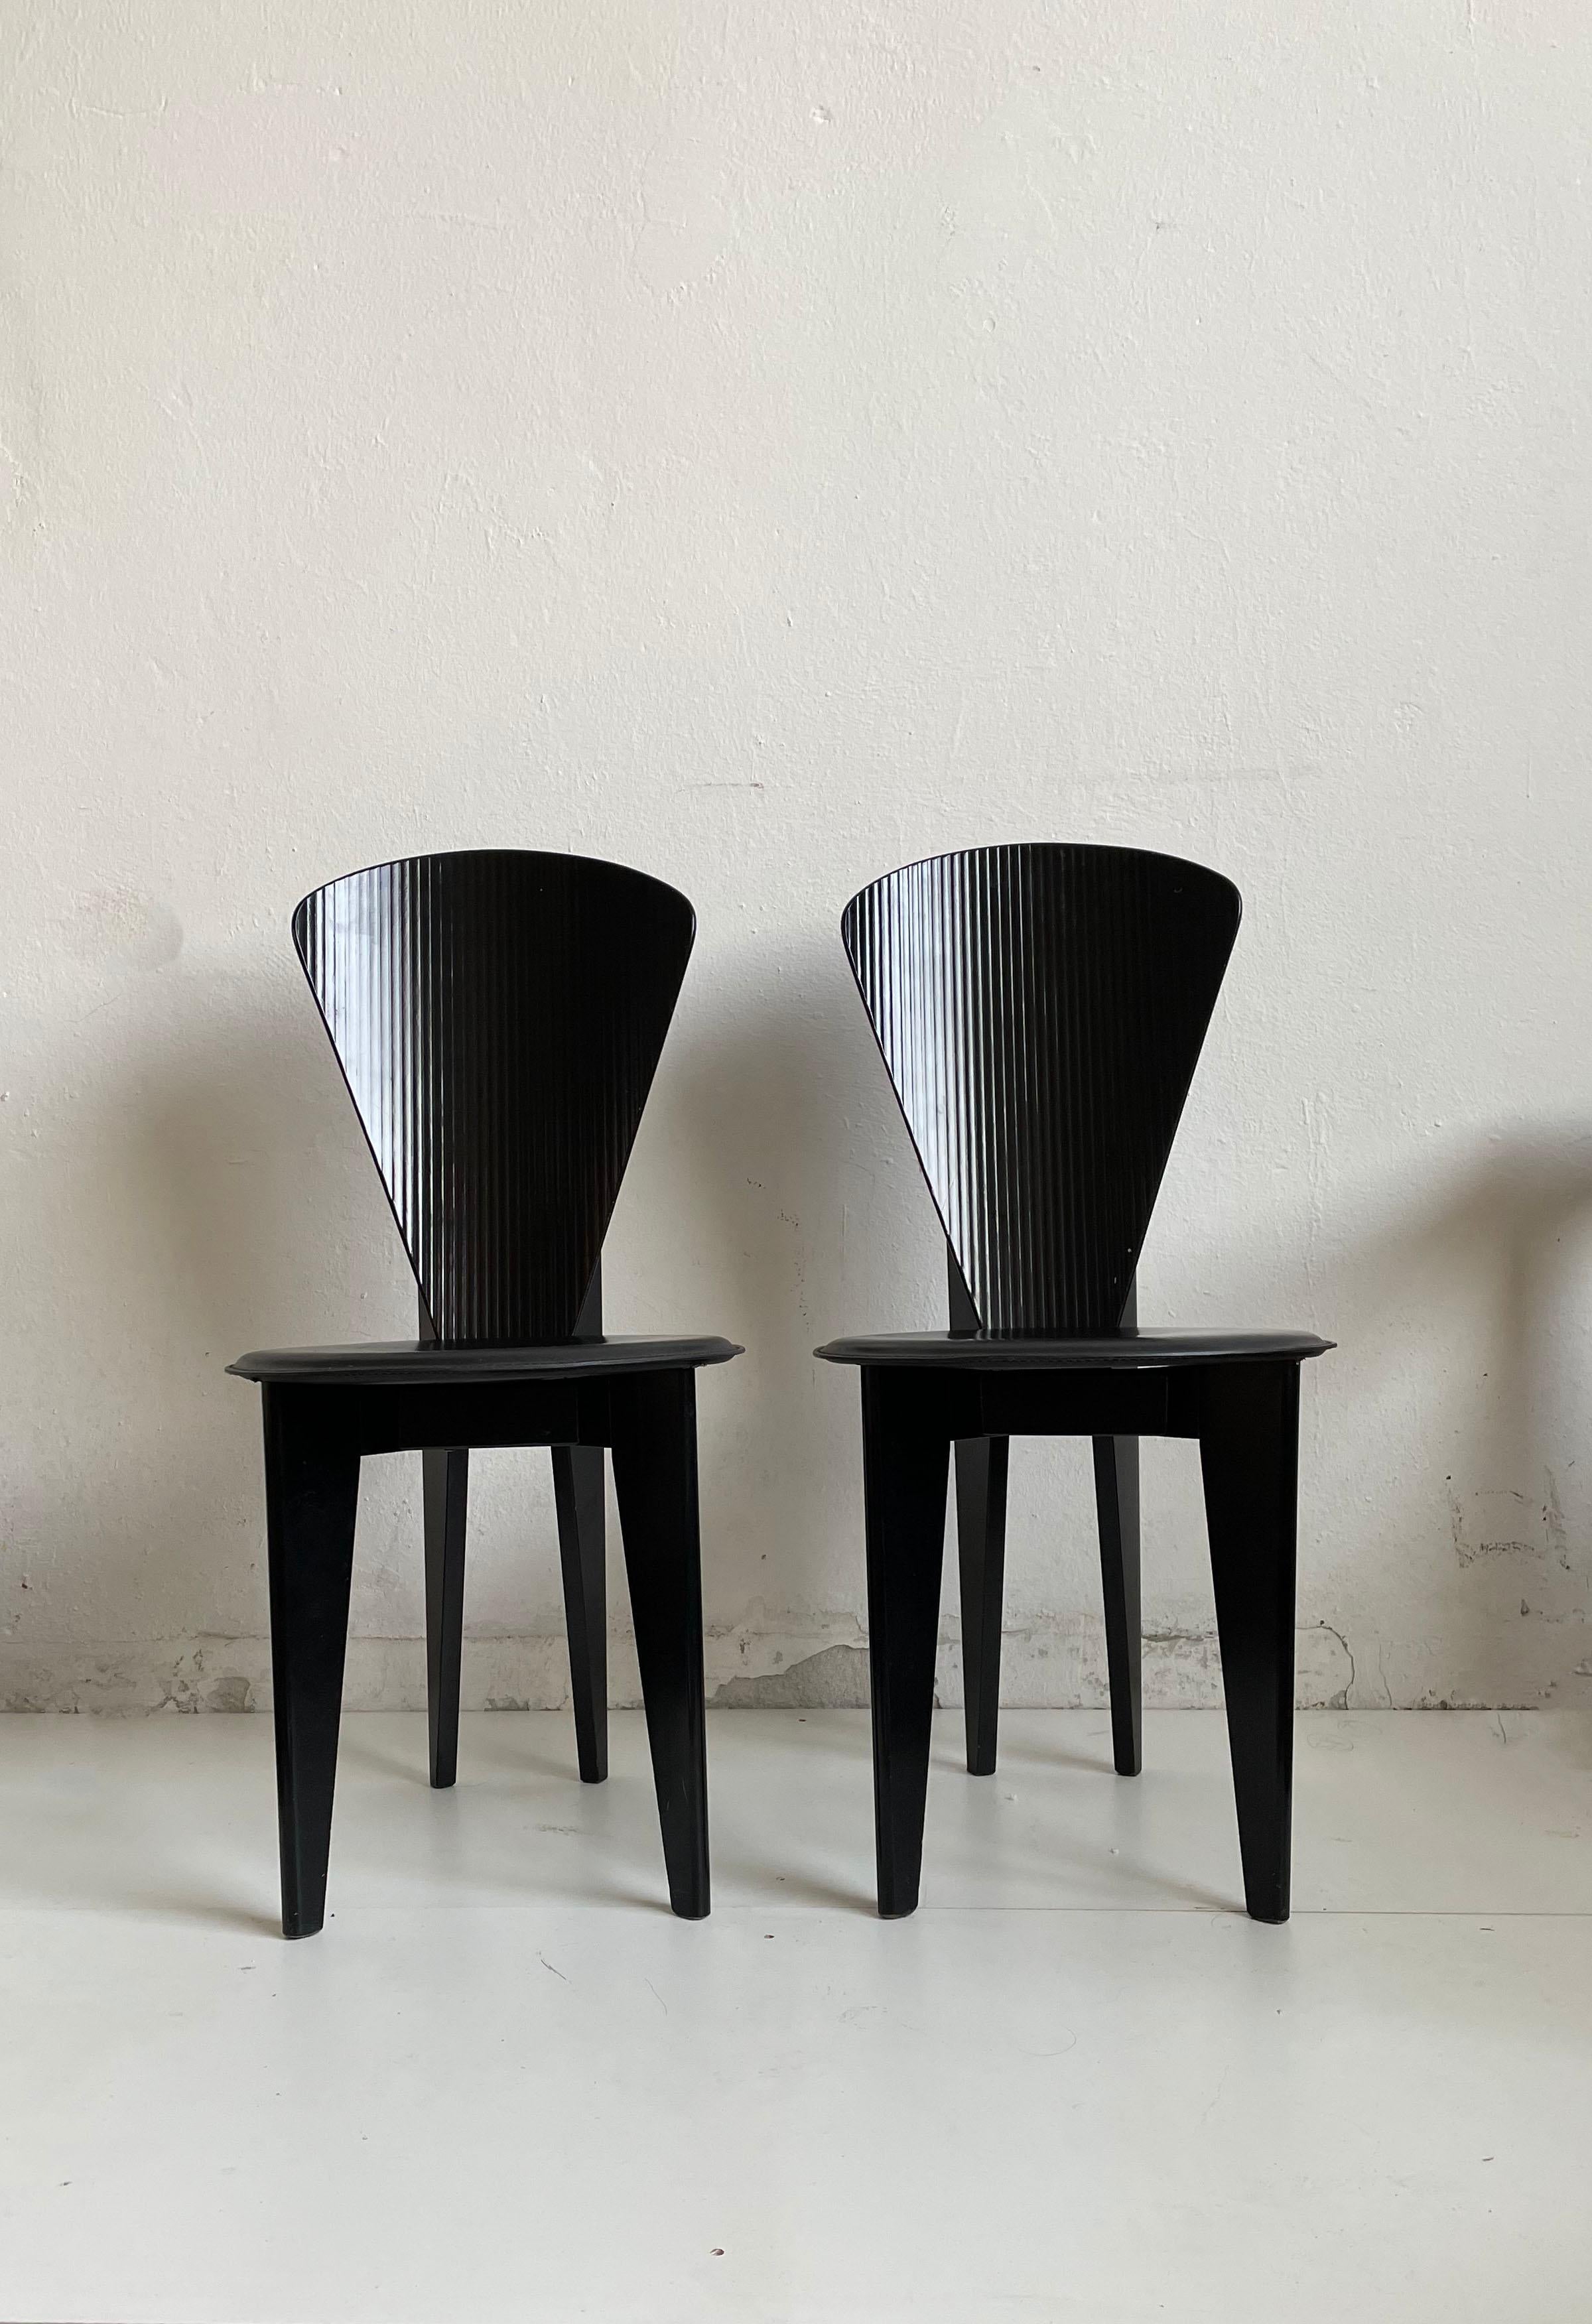 This set of two black wooden dining chairs by Calligaris was made in Italy, circa 1980.

Stunning sculptural postmodern design. These dining chairs feature a curved back with ridges and round leather seats.

There are no structural issues. The